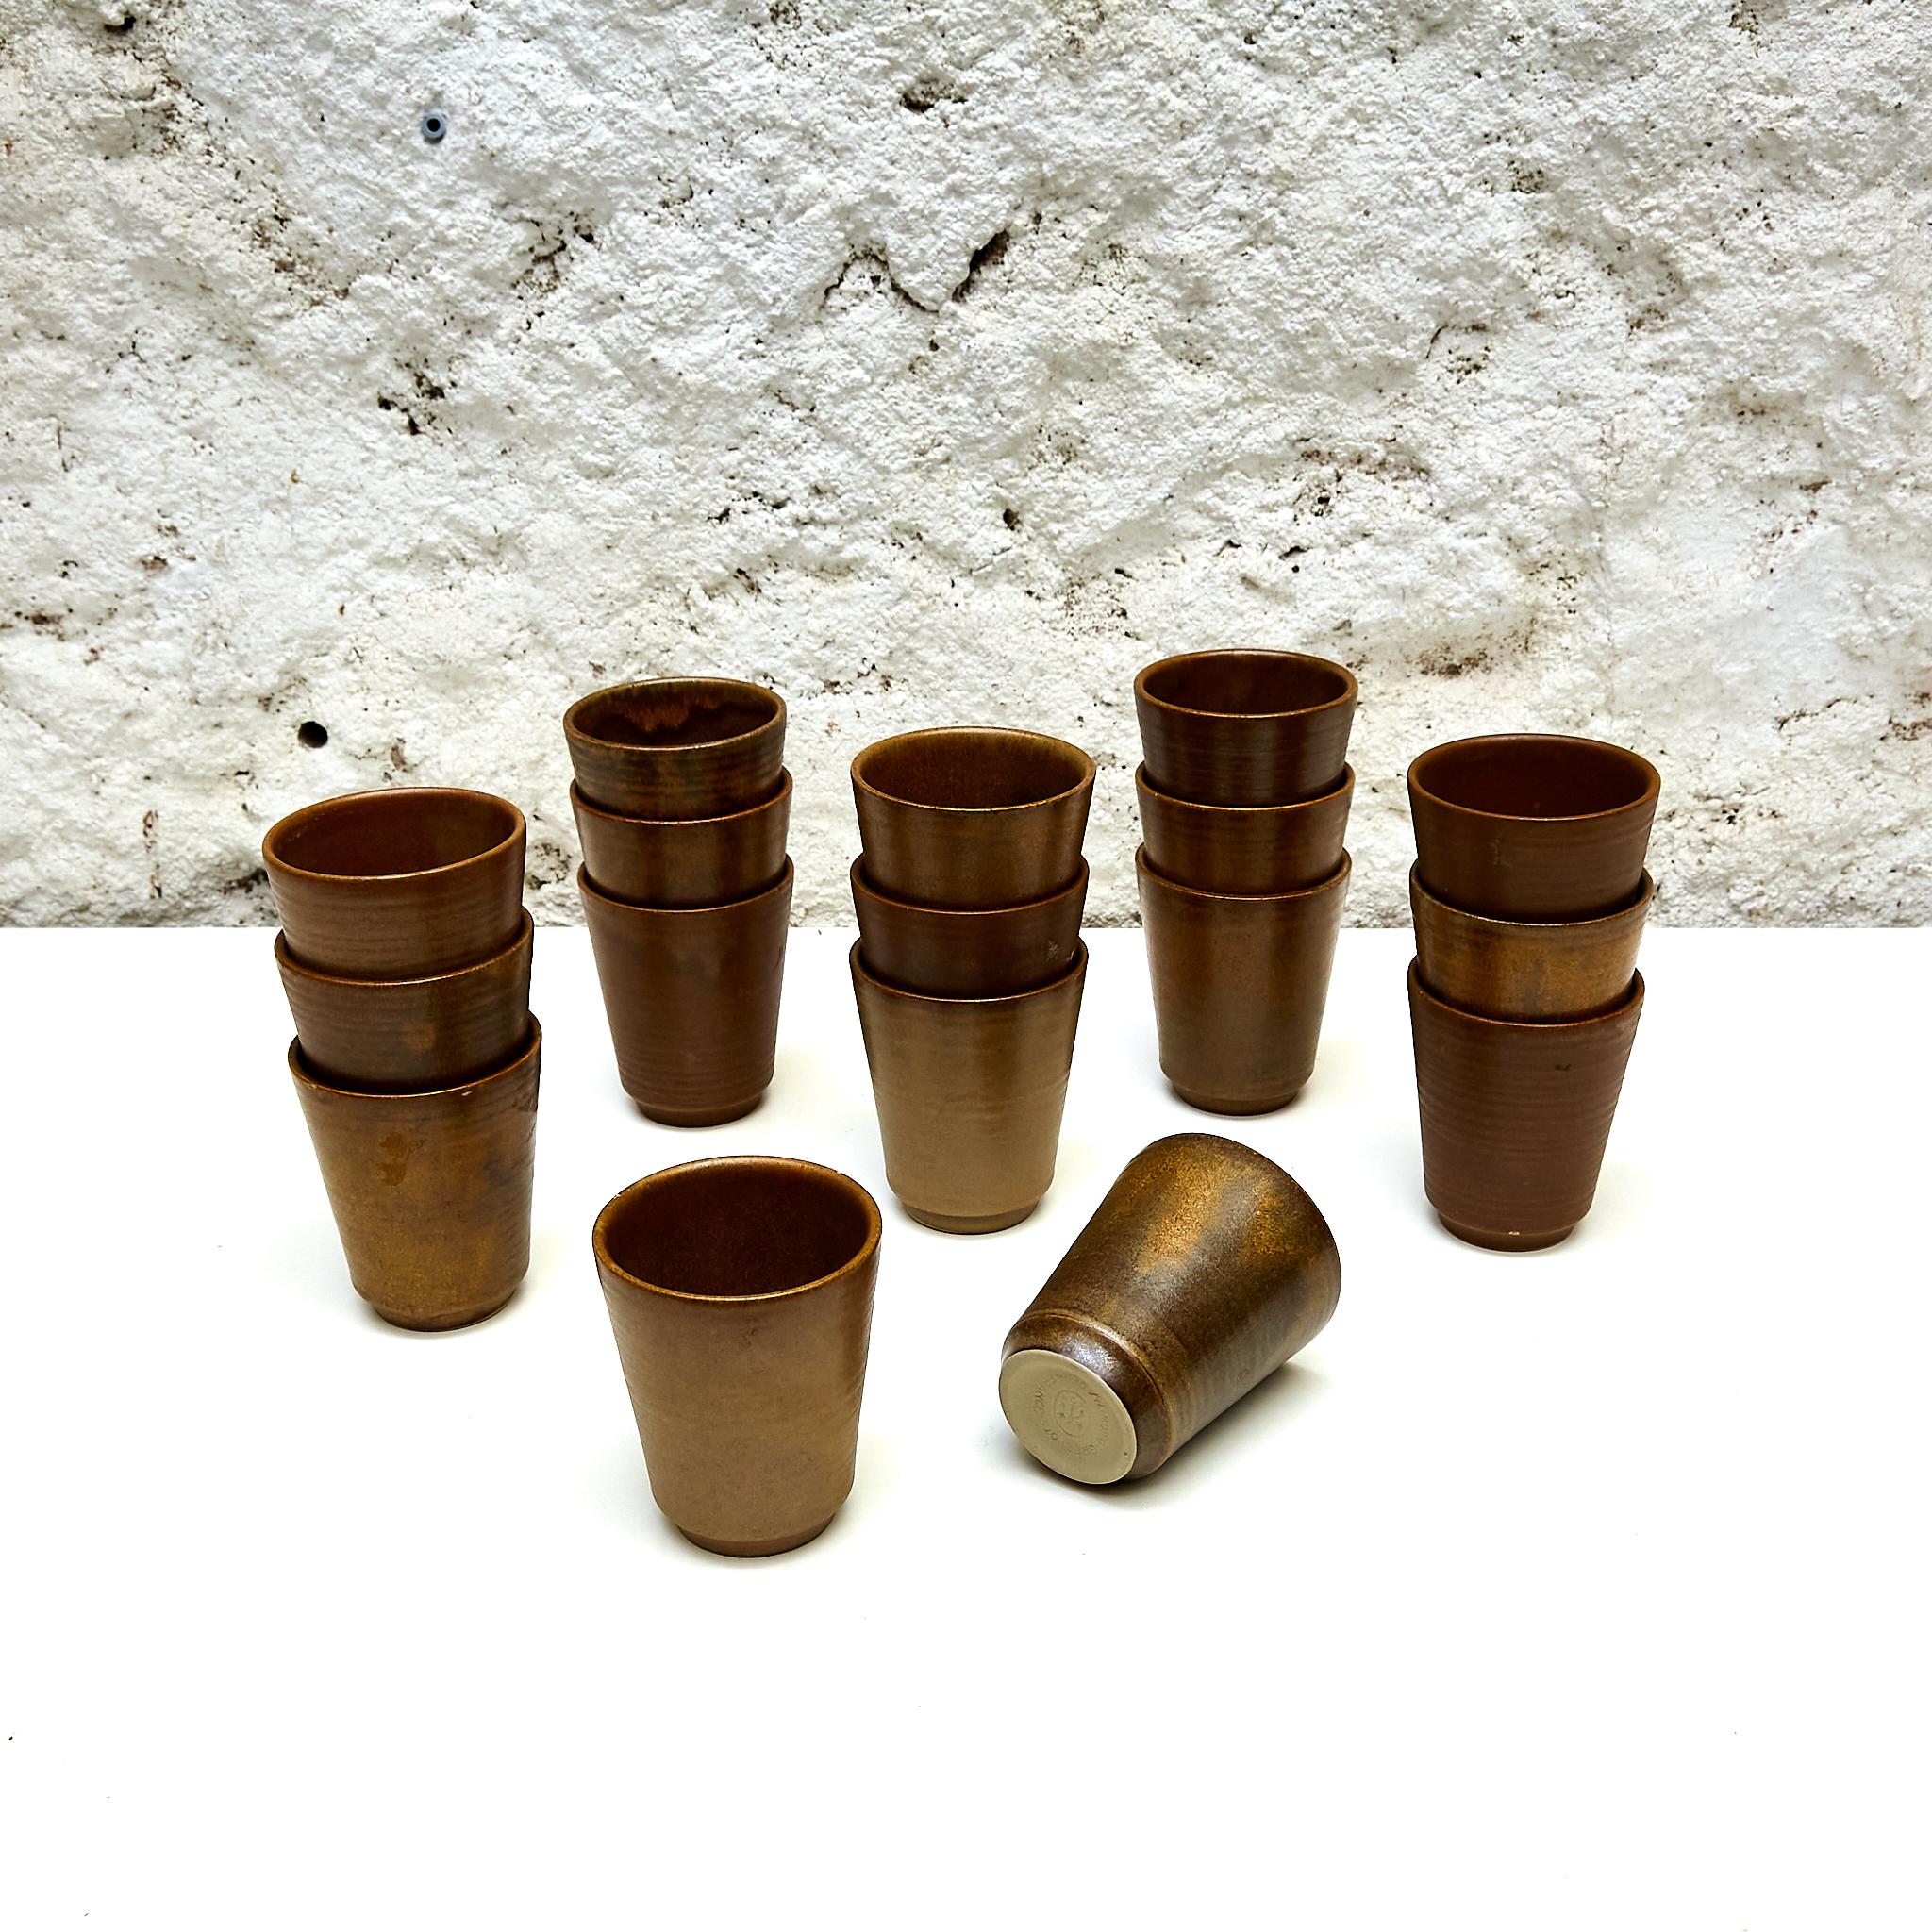 Set of 17 Ceramic Glass by Grespots.

Manufactured in France, circa 1960.

In original condition with minor wear consistent of age and use, preserving a beautiful patina.

Materials: 
Ceramic.

Dimensions: 
Diam. 8 cm x H 89